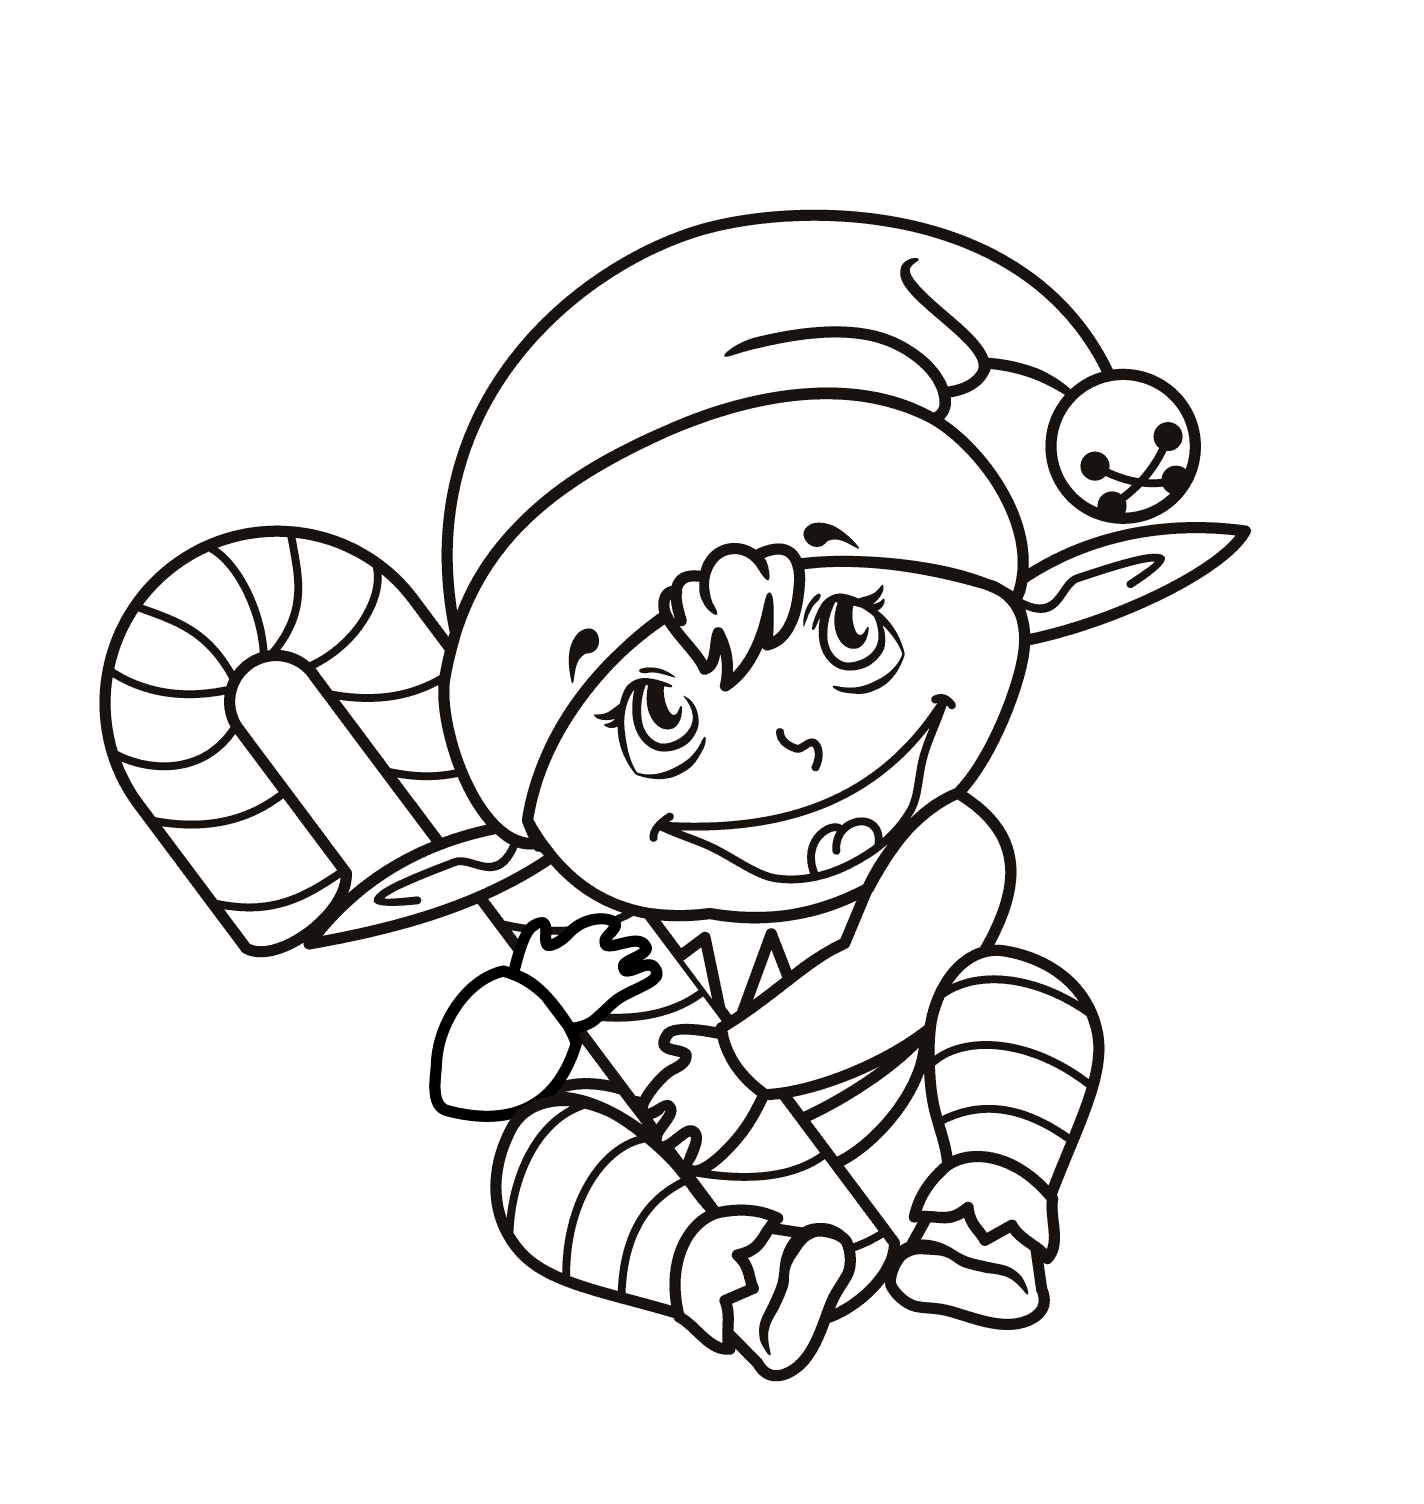 Cute Elf With Candy Cane For Kids Coloring Page